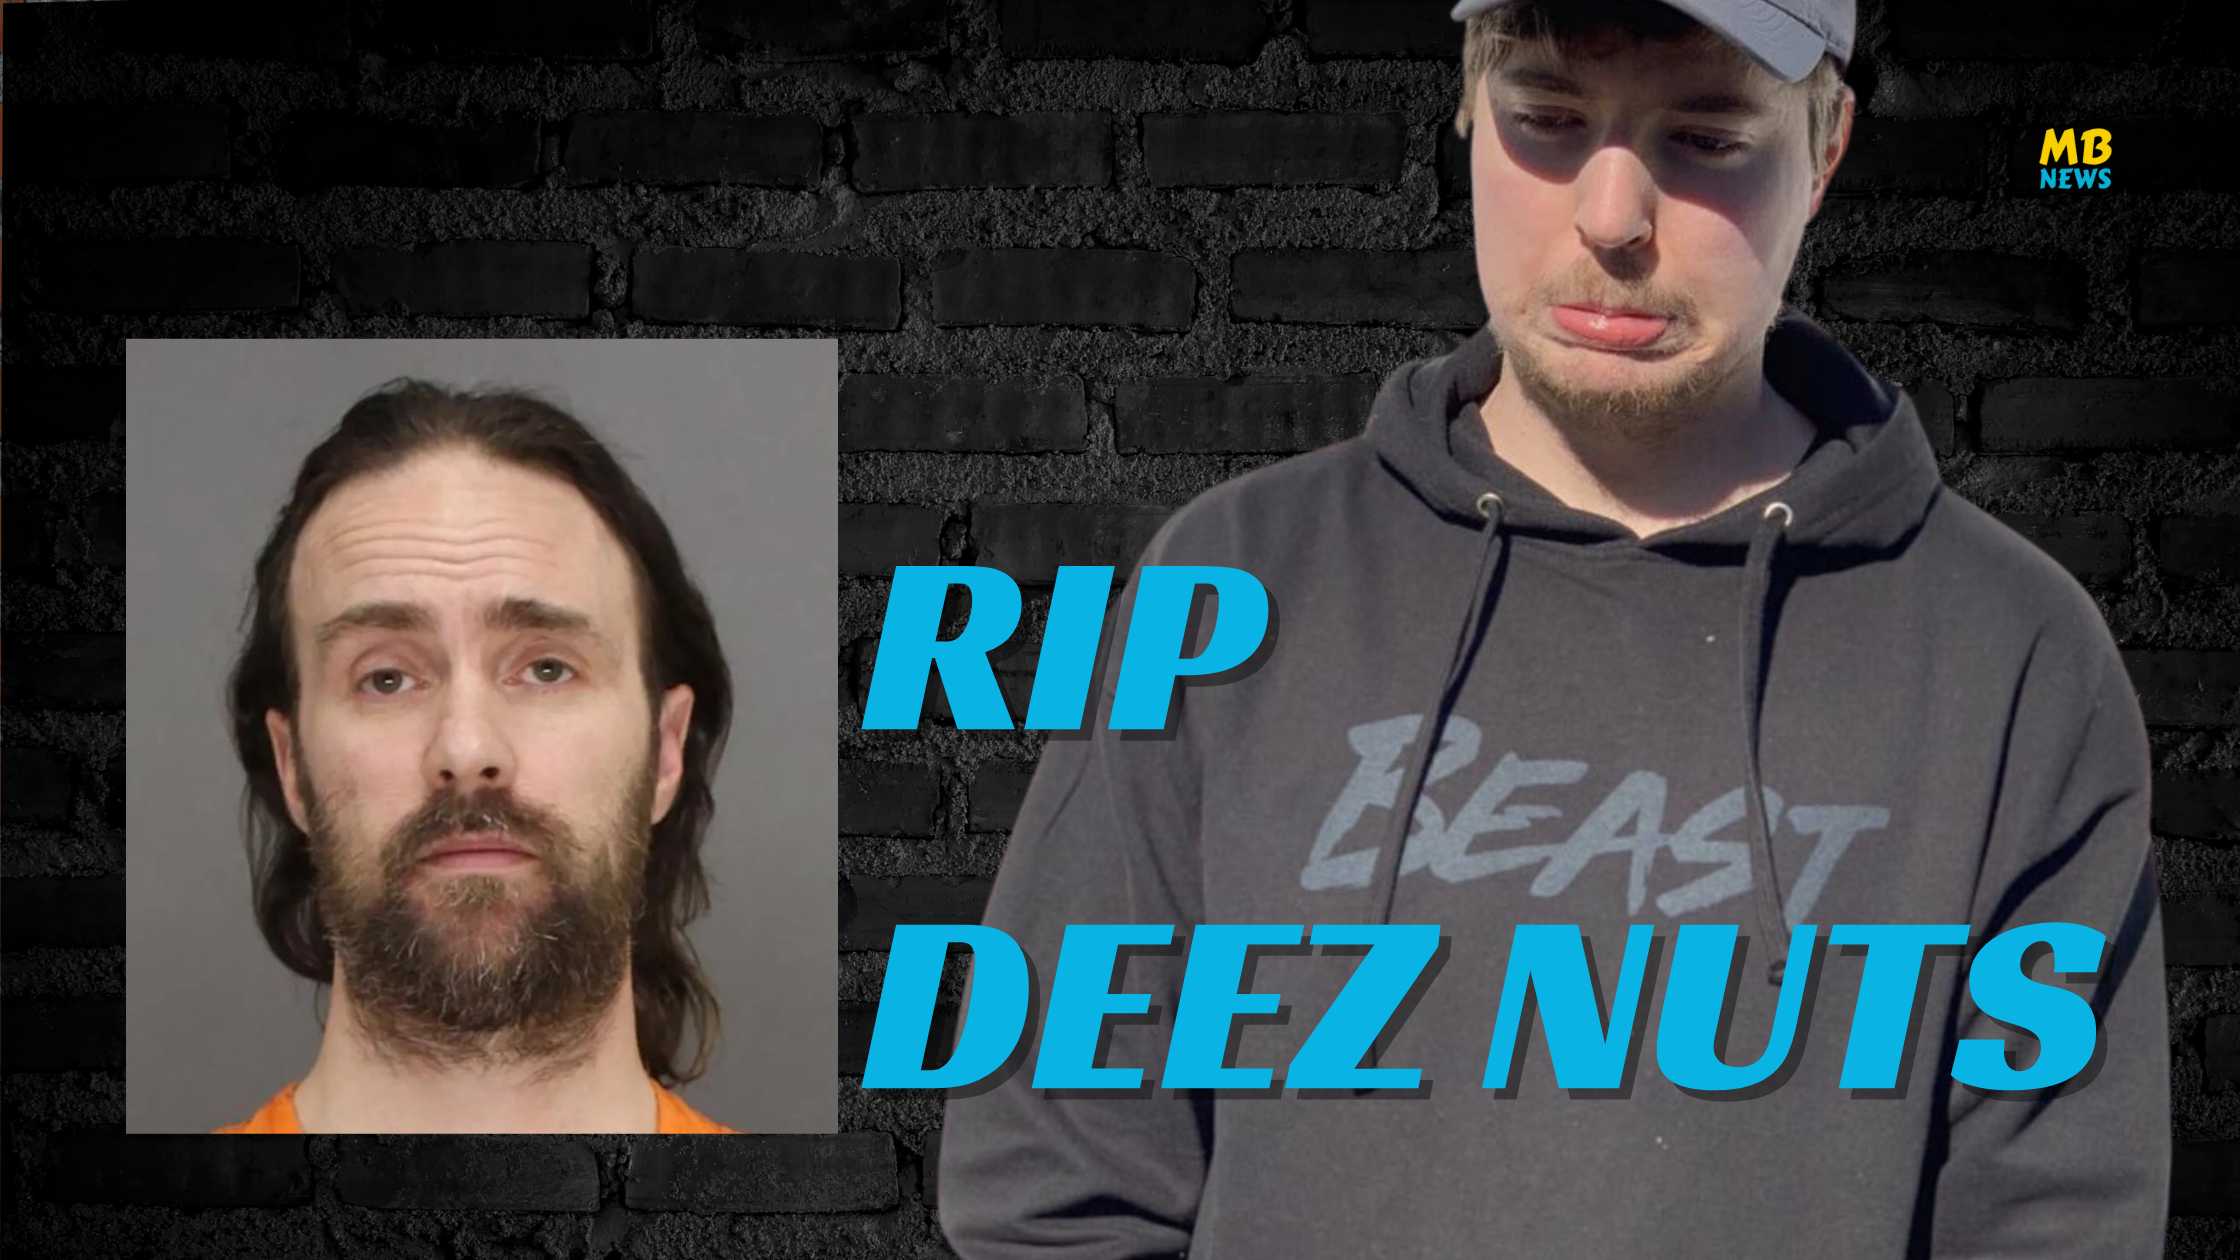 Man Named Deez-Nuts Arrested for Battery MrBeast's Comment Sparks Conversation